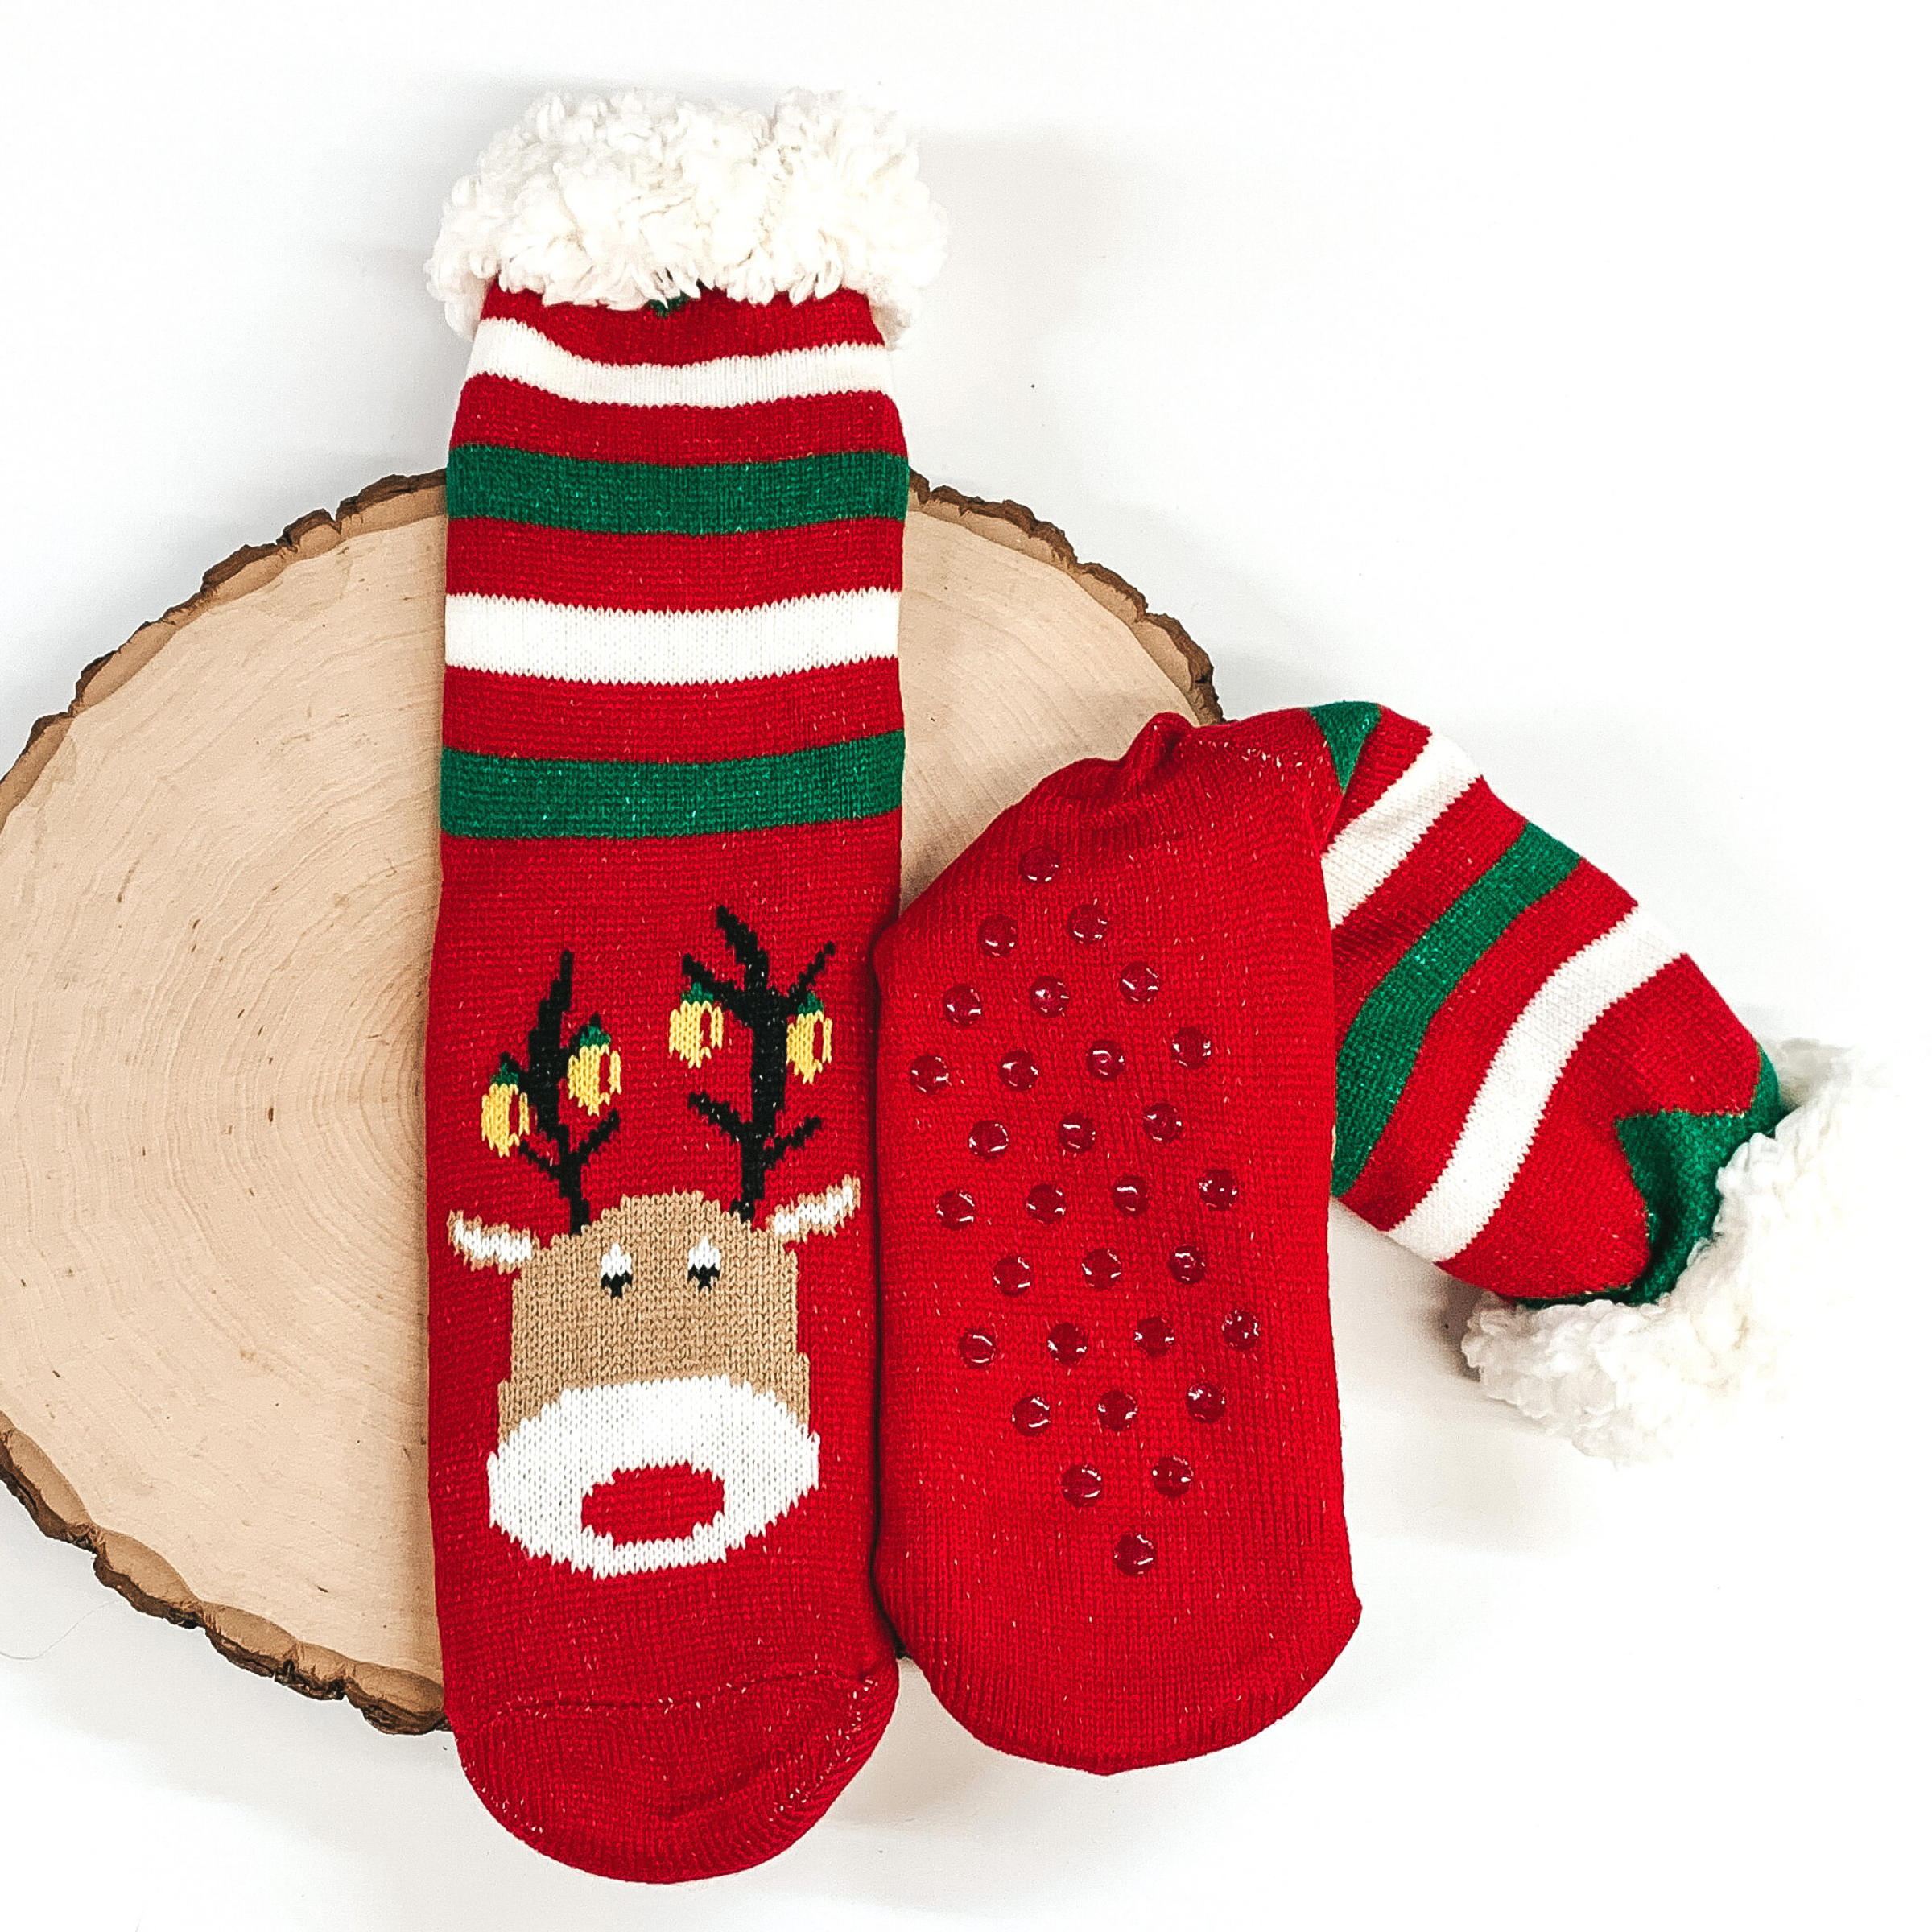 Red socks that has Rudolph's face with lights on the antlers towards the bottom of the socks. These socks also have green and white stripes on the ankle parts, has rubber grips on the bottom, and white fluff on the top of the socks. these socks are pictured laying on a piece of wood on a white background.